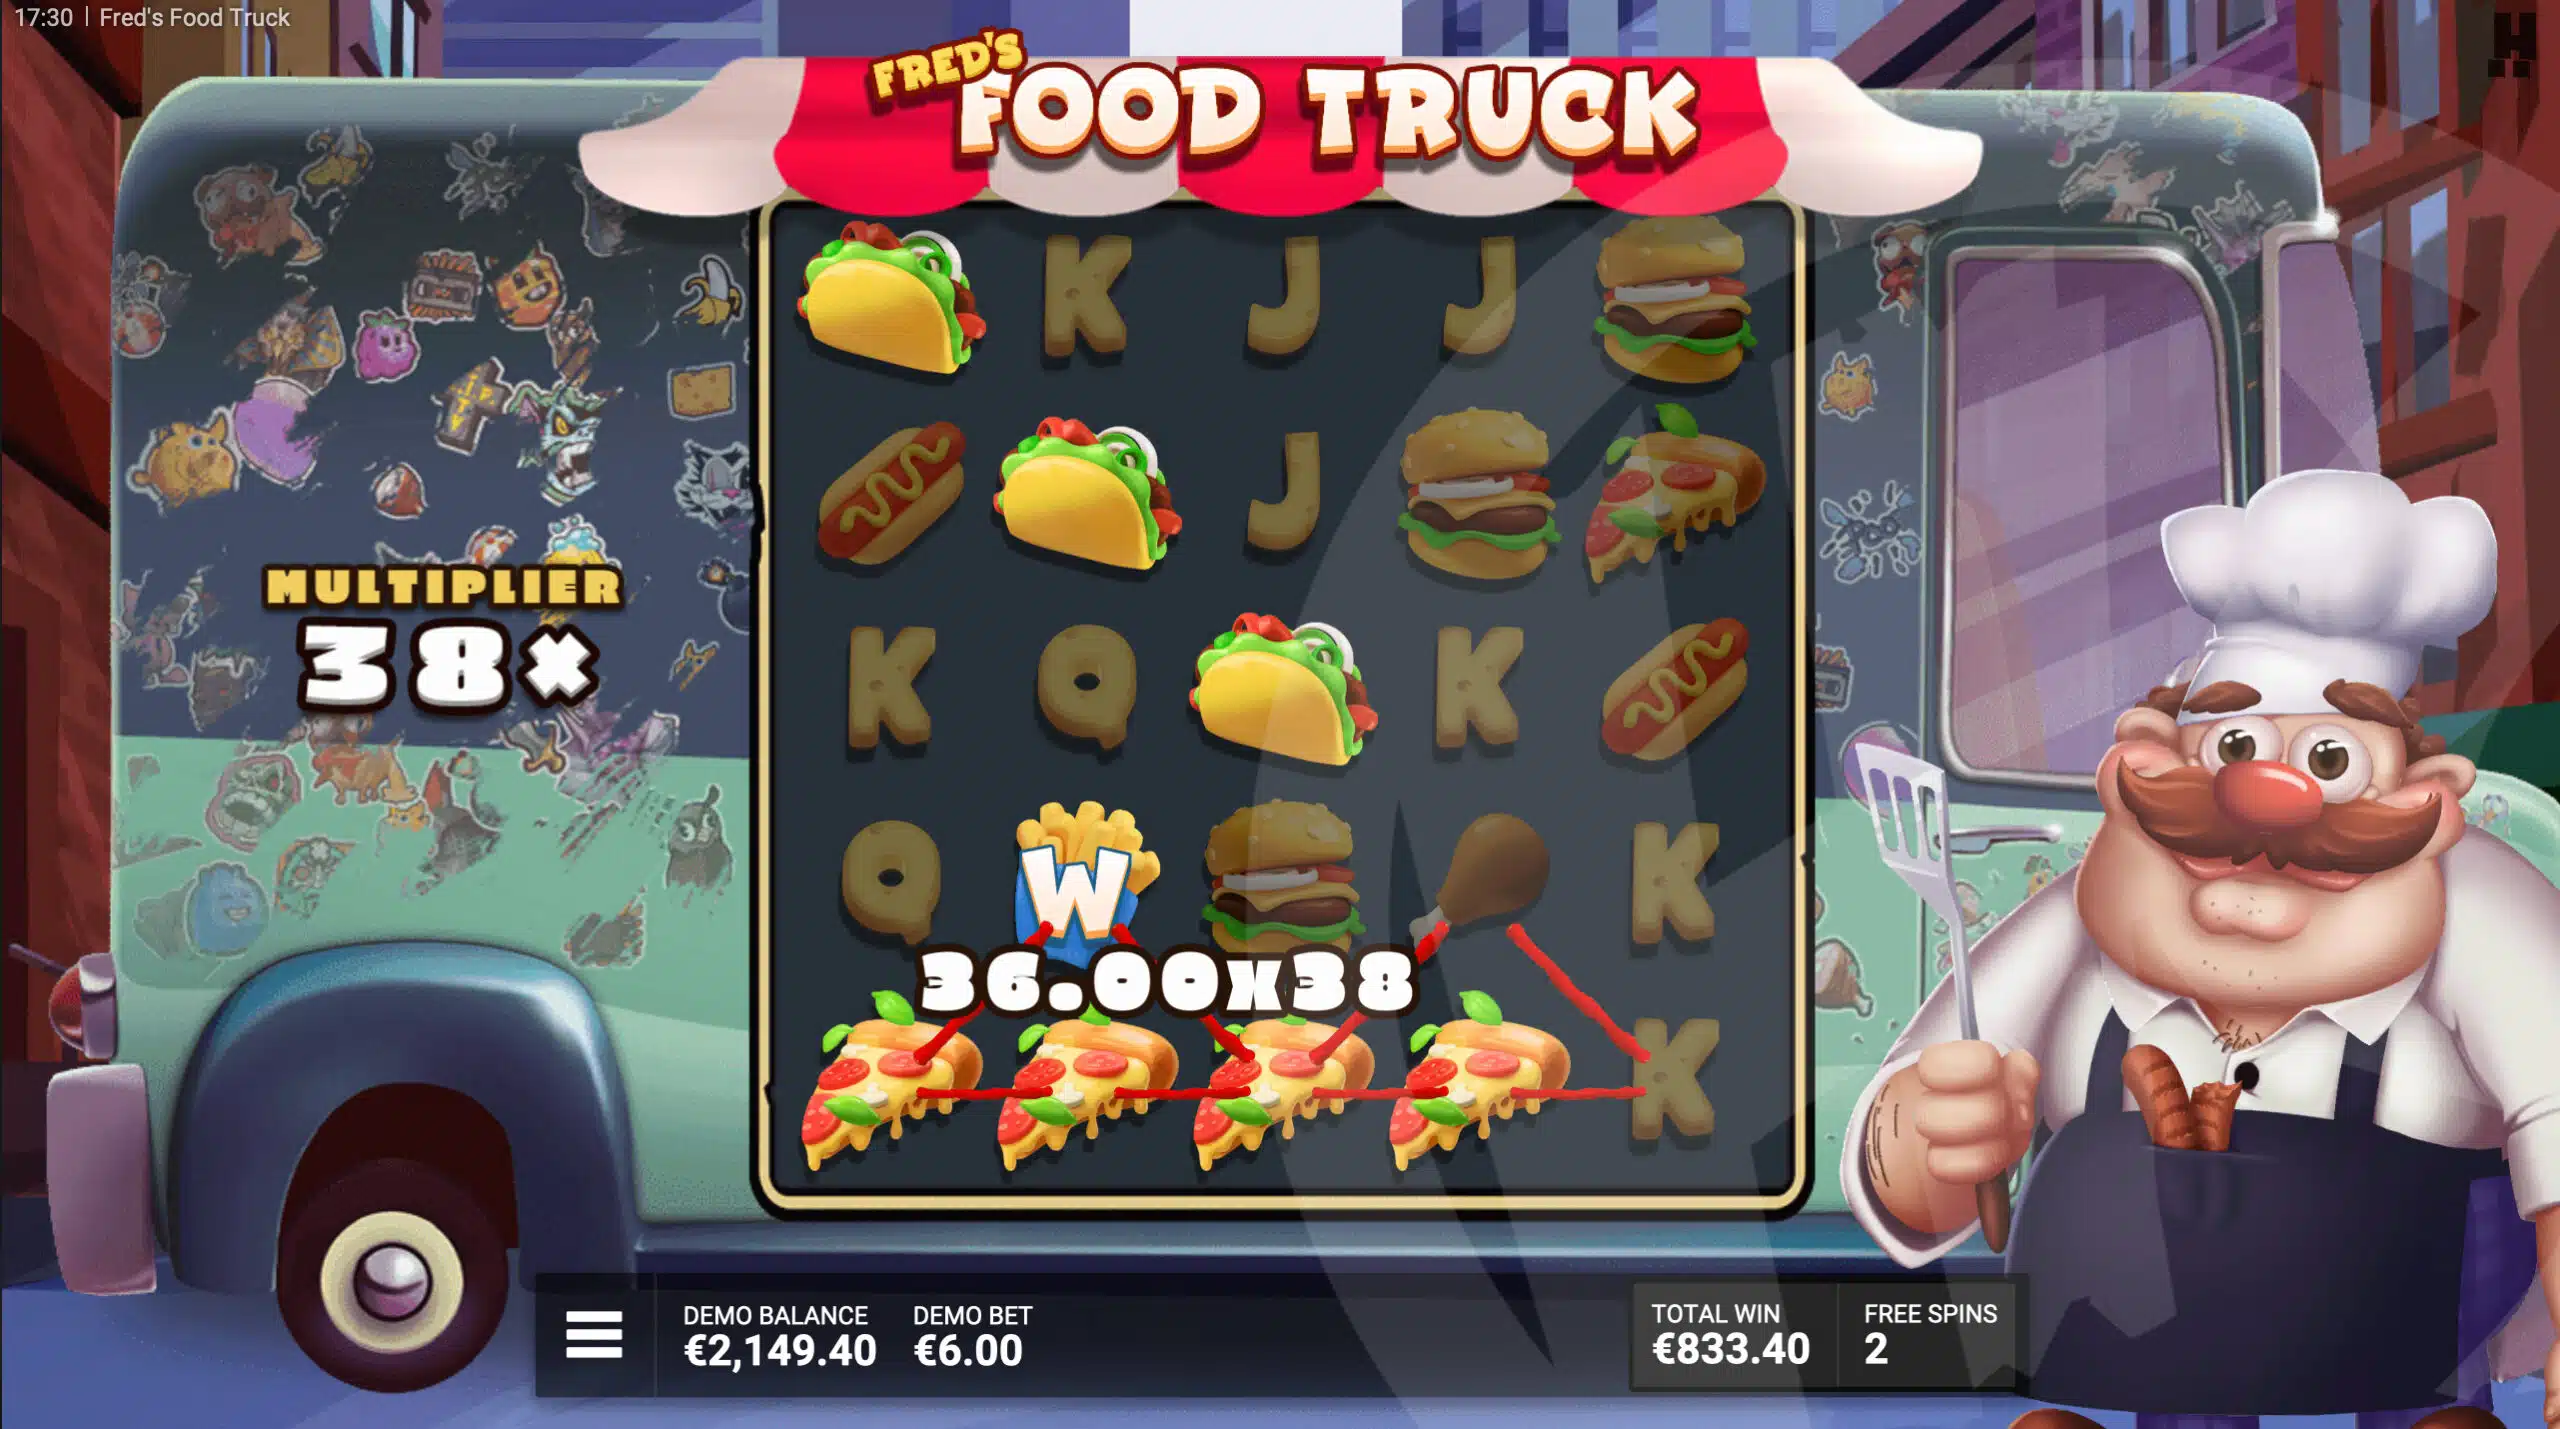 Fred's Food Truck Big Menu Free Spins Feature